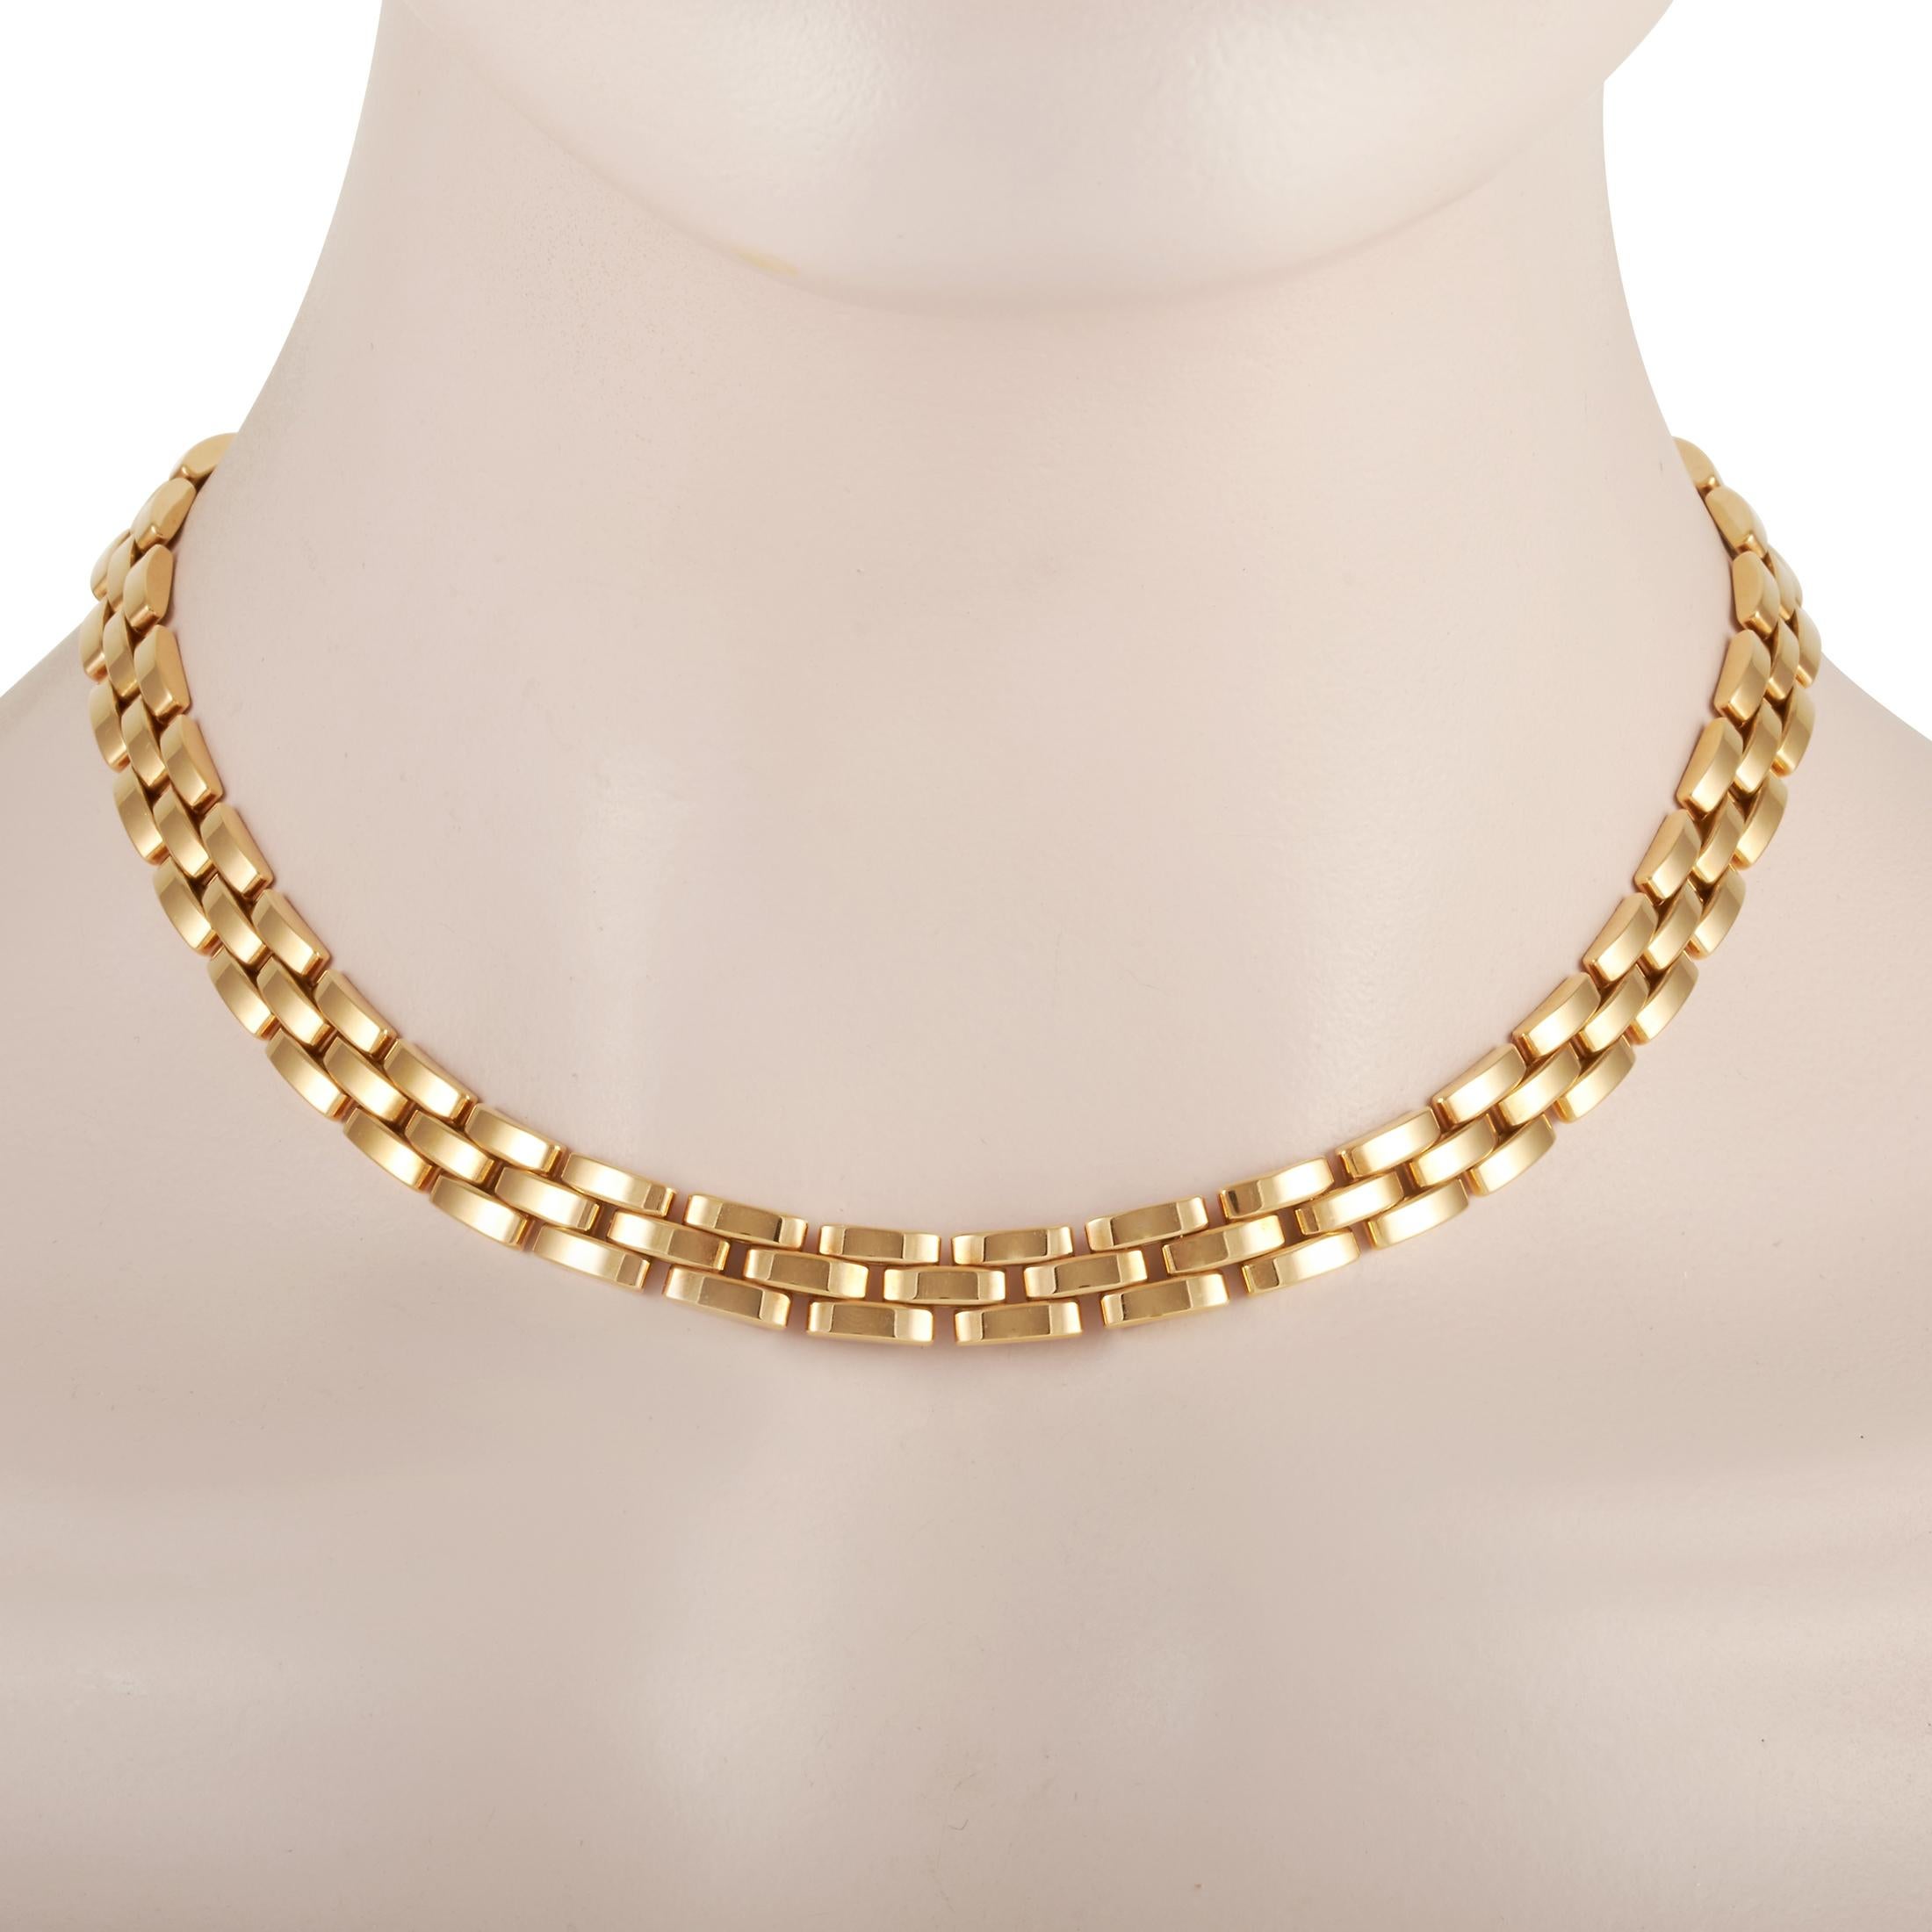 The Cartier “Maillon Panthère” necklace is crafted from 18K yellow gold and weighs 84.3 grams, measuring 15” in length.
 
 This jewelry piece is offered in estate condition and includes the manufacturer’s box and papers.